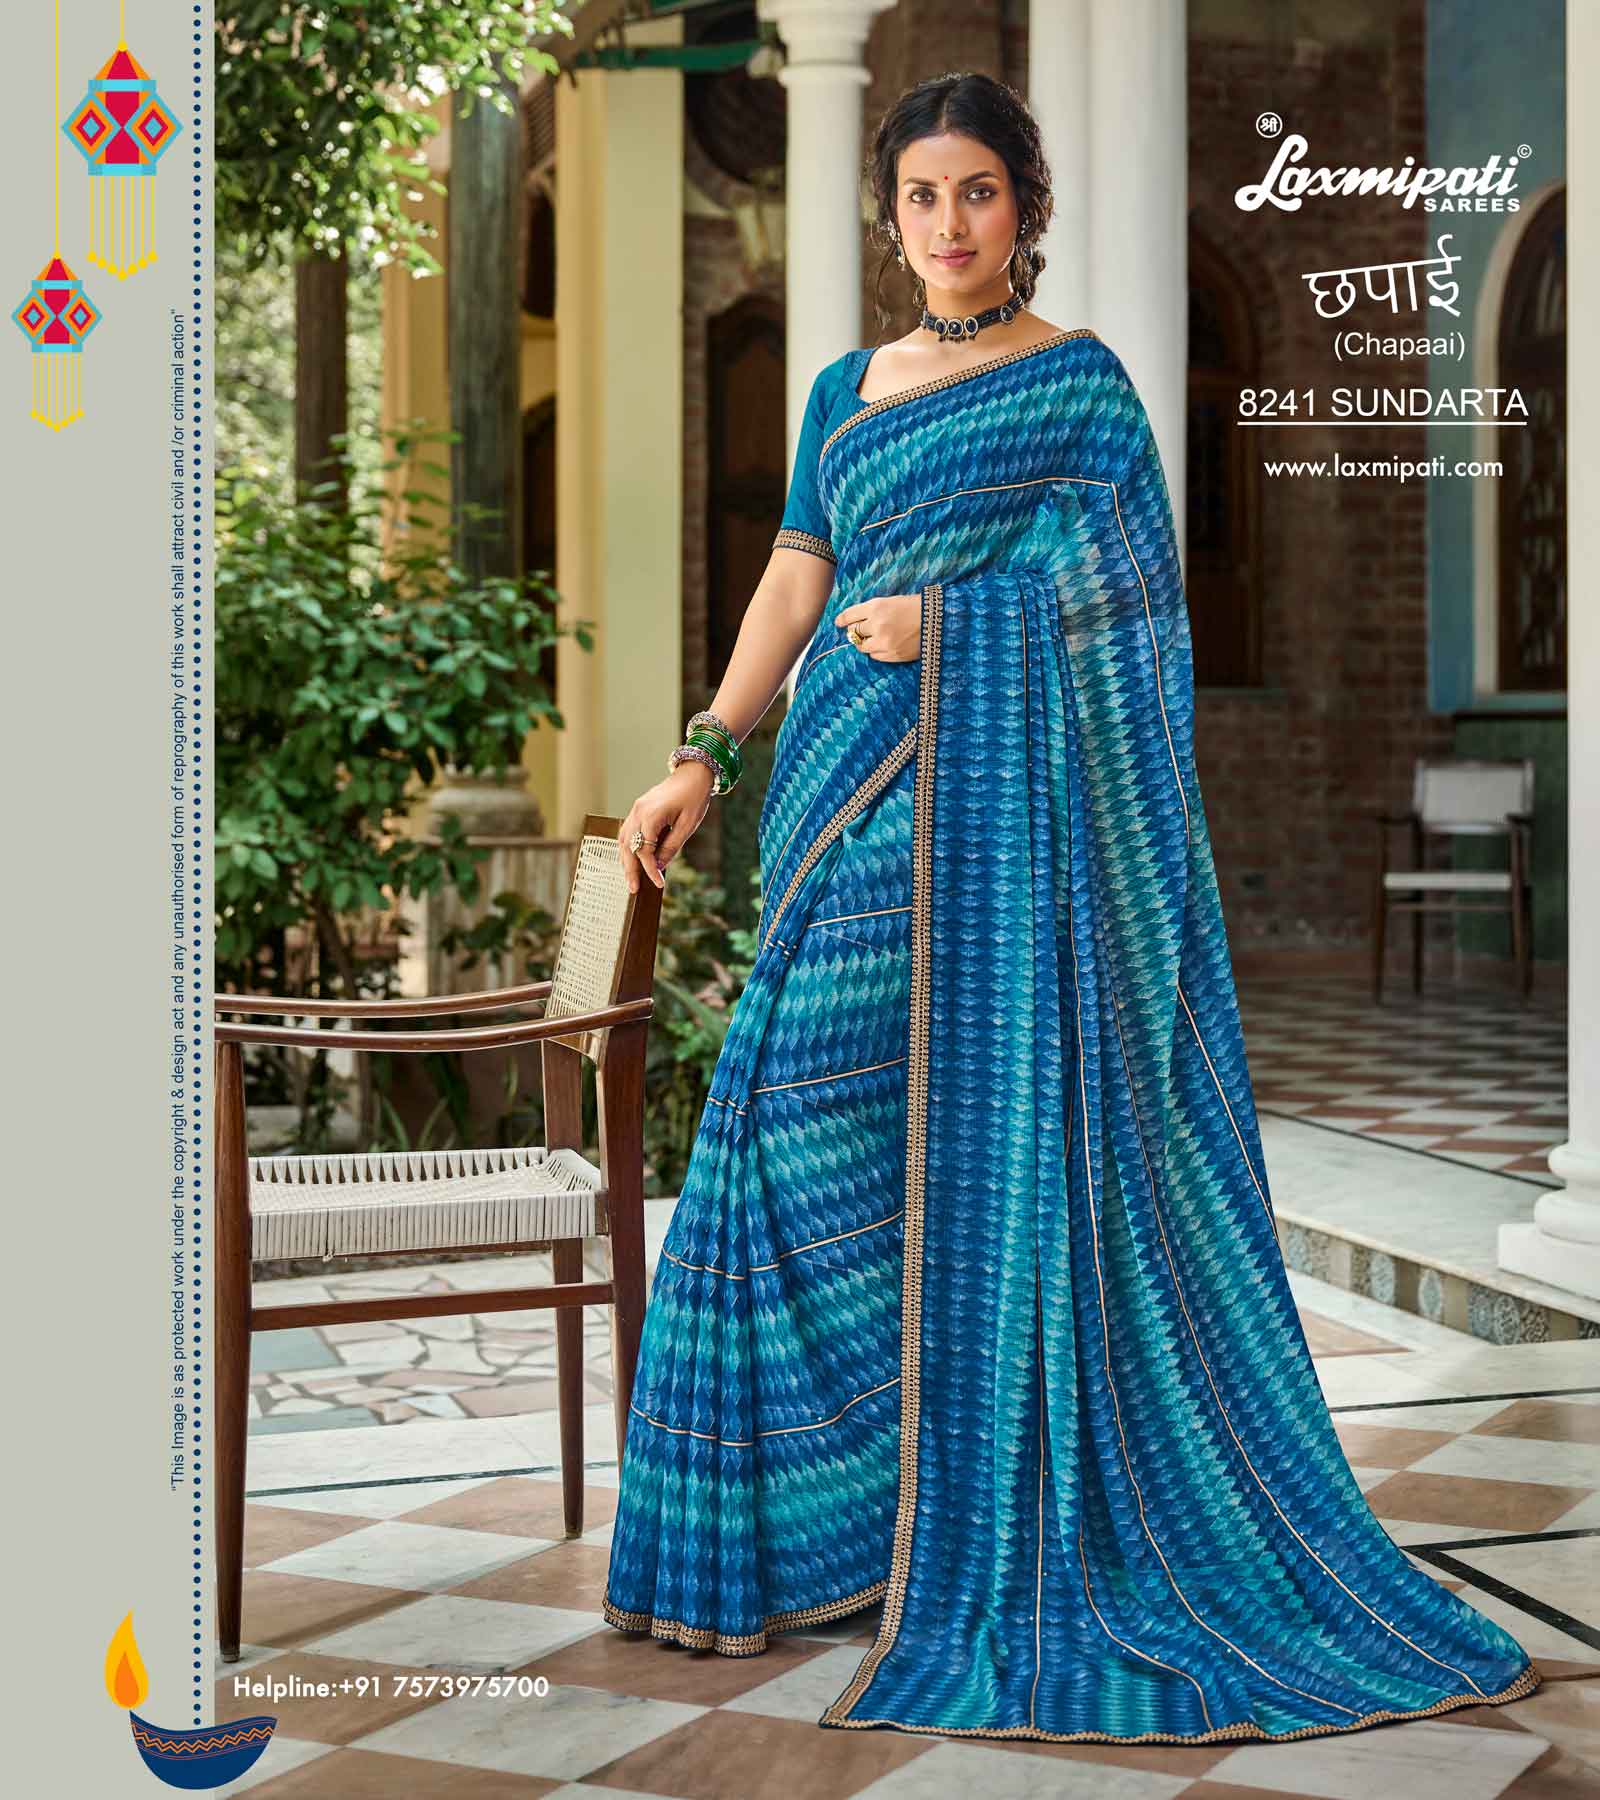 Buy Laxmipati saree collection at Amazon.in